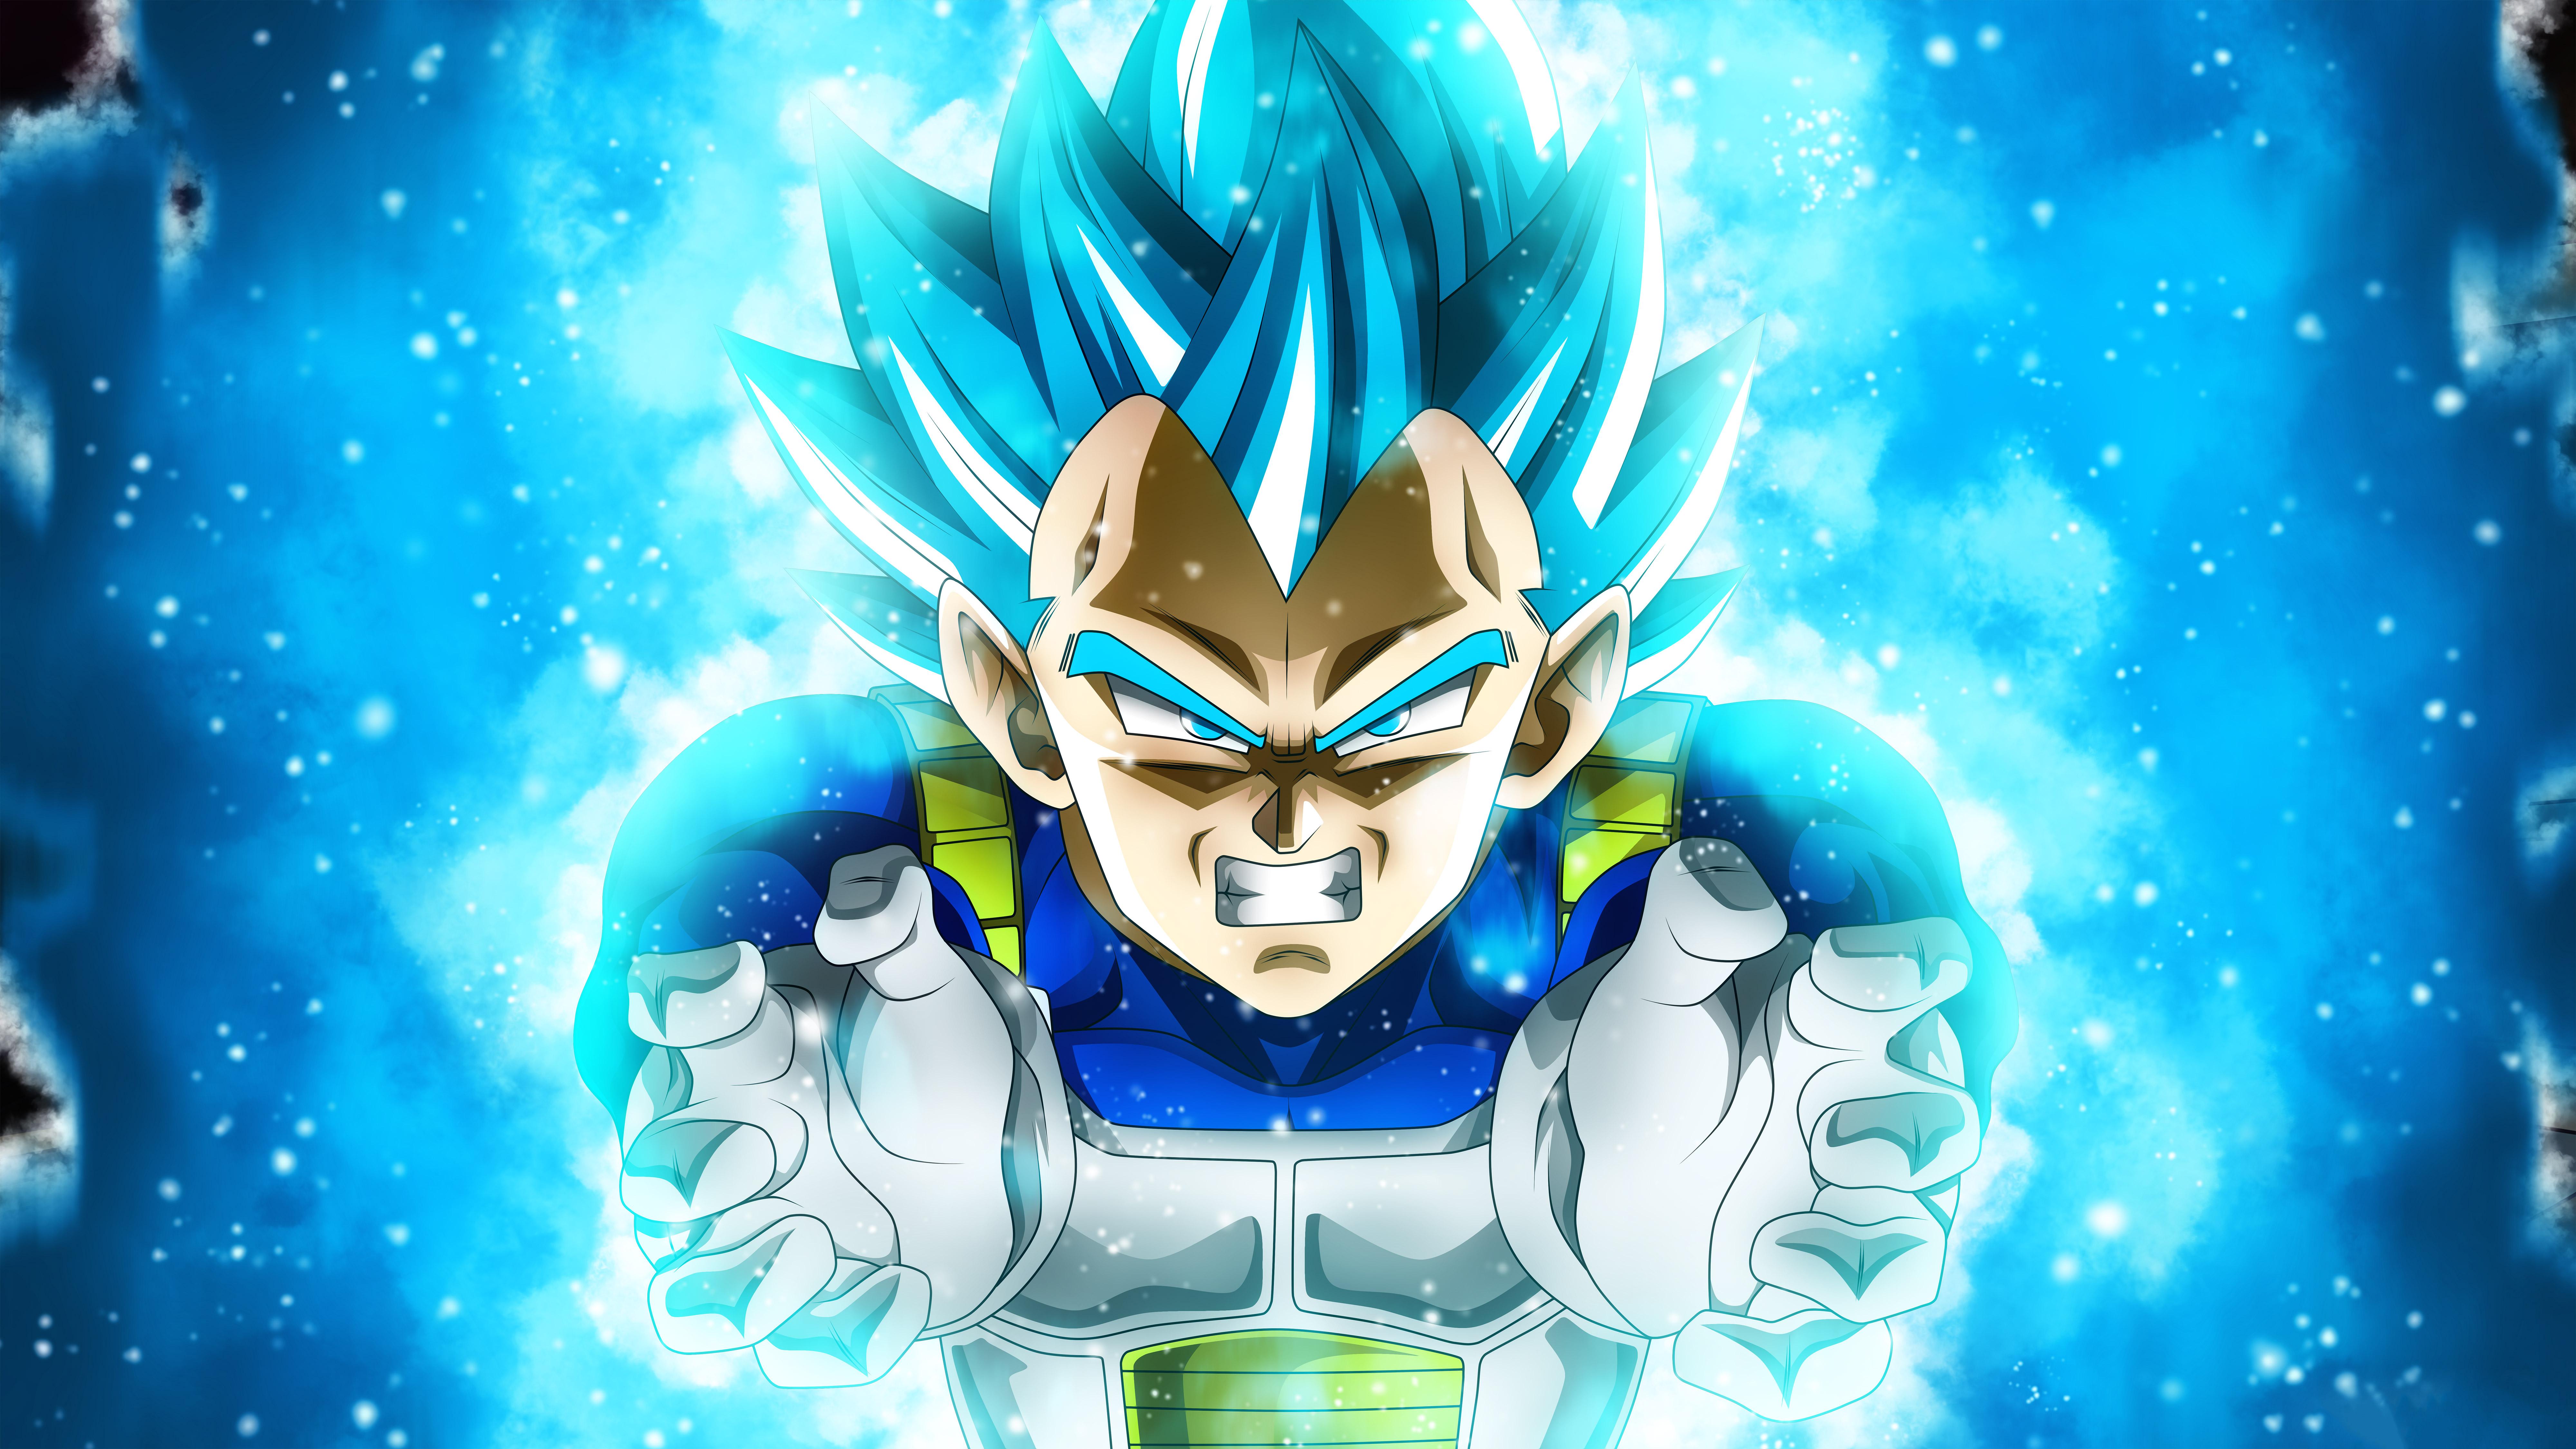 8000 x 4500 · jpeg - Dragon Ball Super 8k, HD Anime, 4k Wallpapers, Images, Backgrounds ...